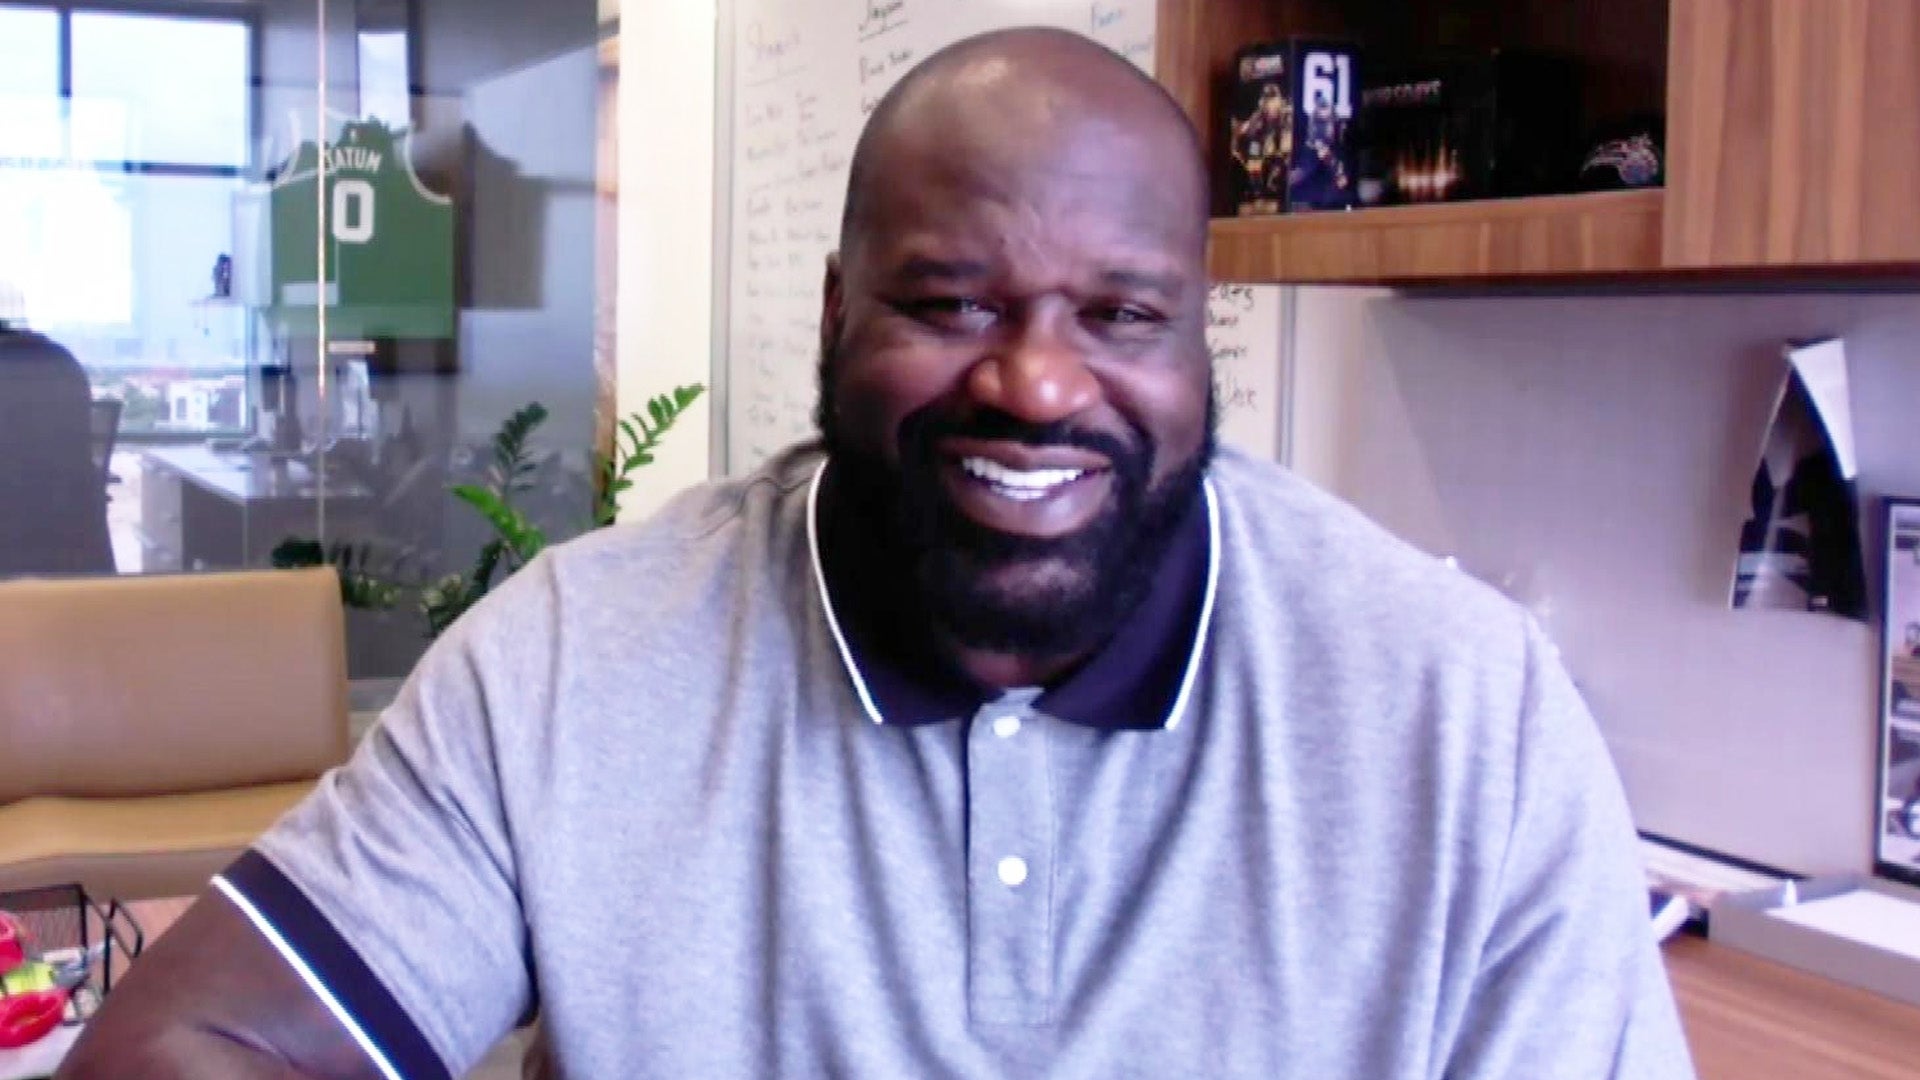 Magic Johnson once advised Shaquille O'Neal about the importance